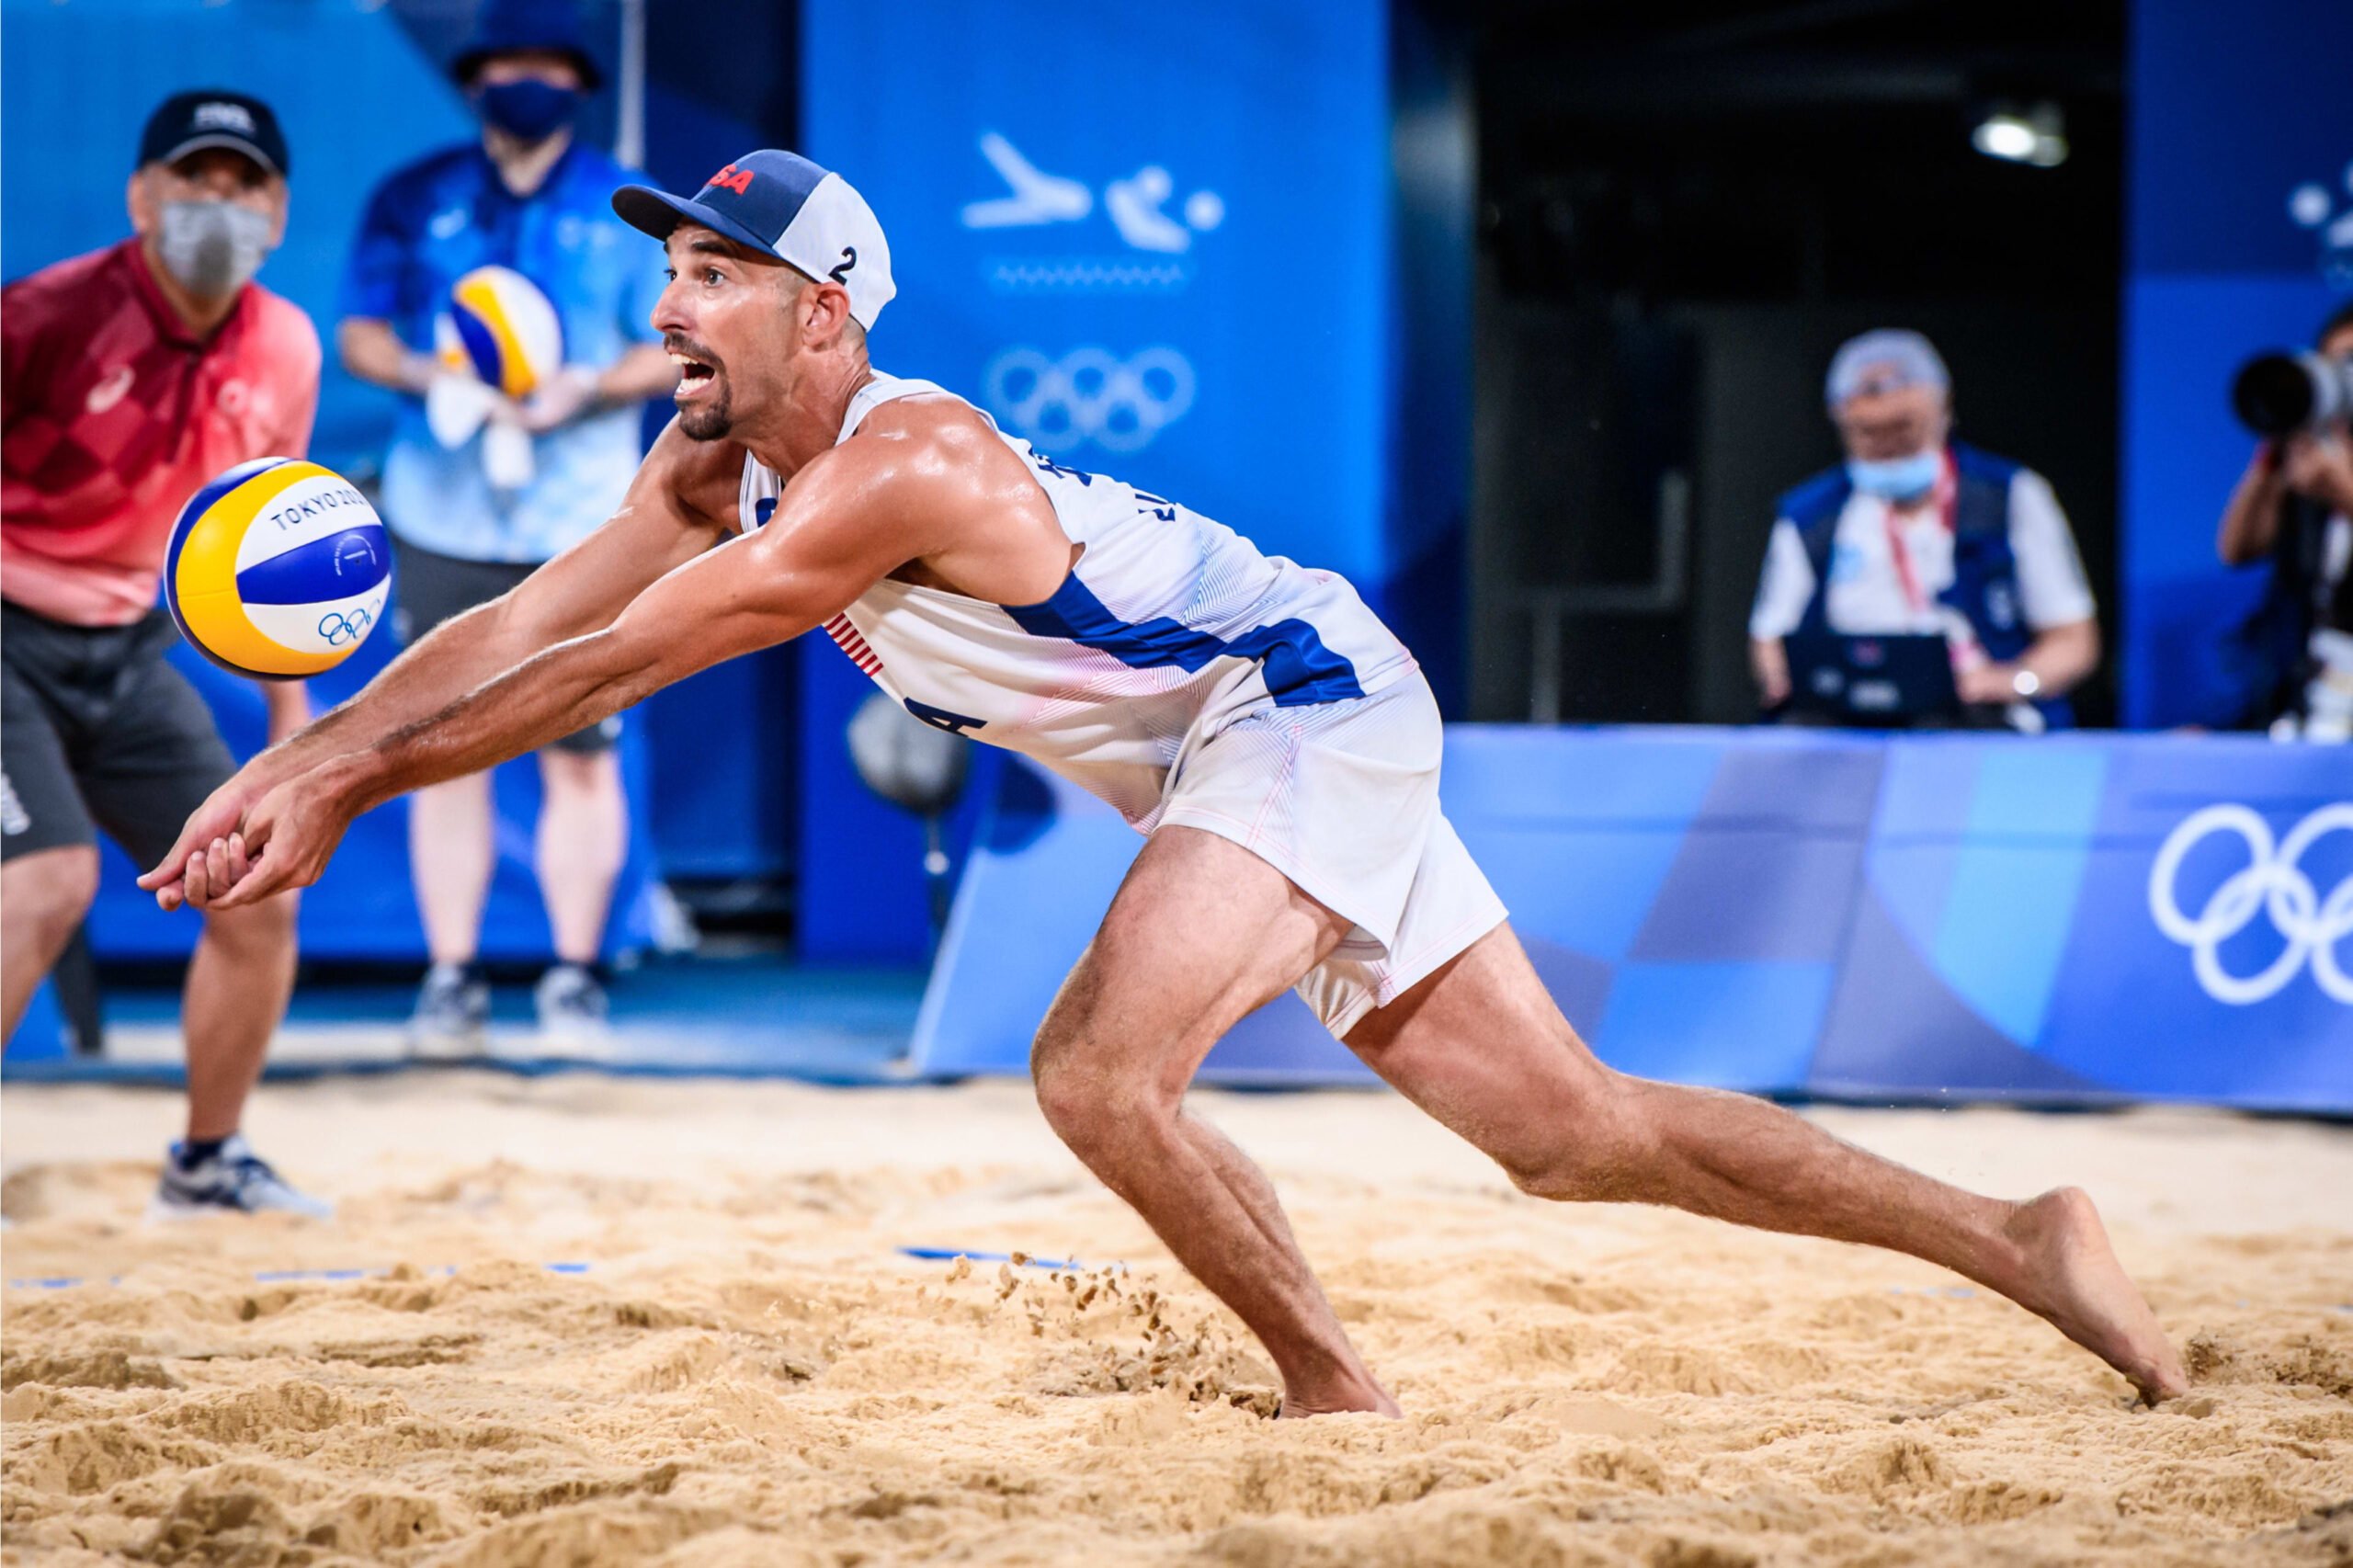 Nick Lucena dives to pass a ball during a beach volleyball match at the Tokyo 2020 Olympic Games